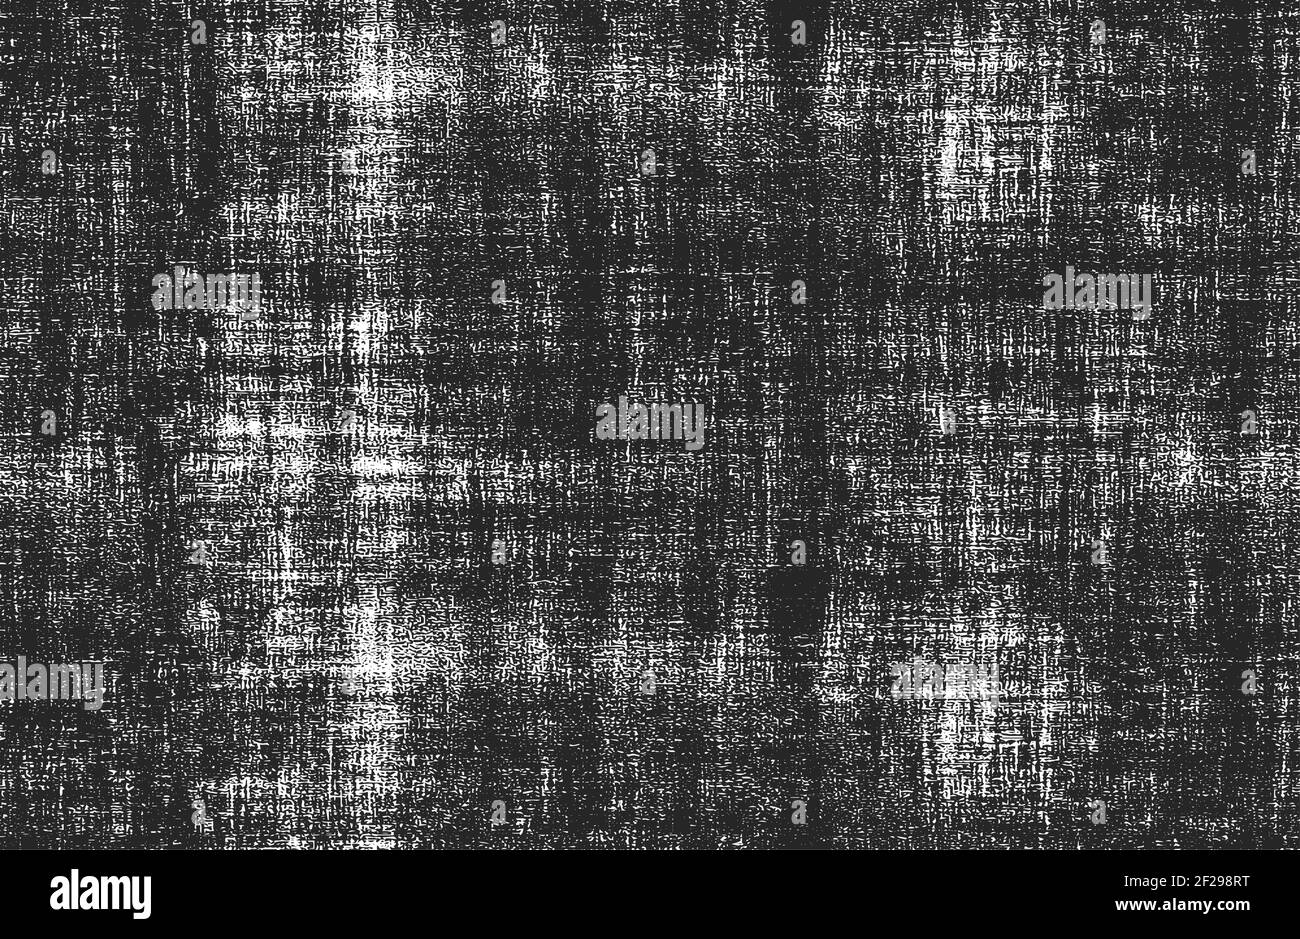 Distressed overlay texture of weaving fabric. grunge background ...